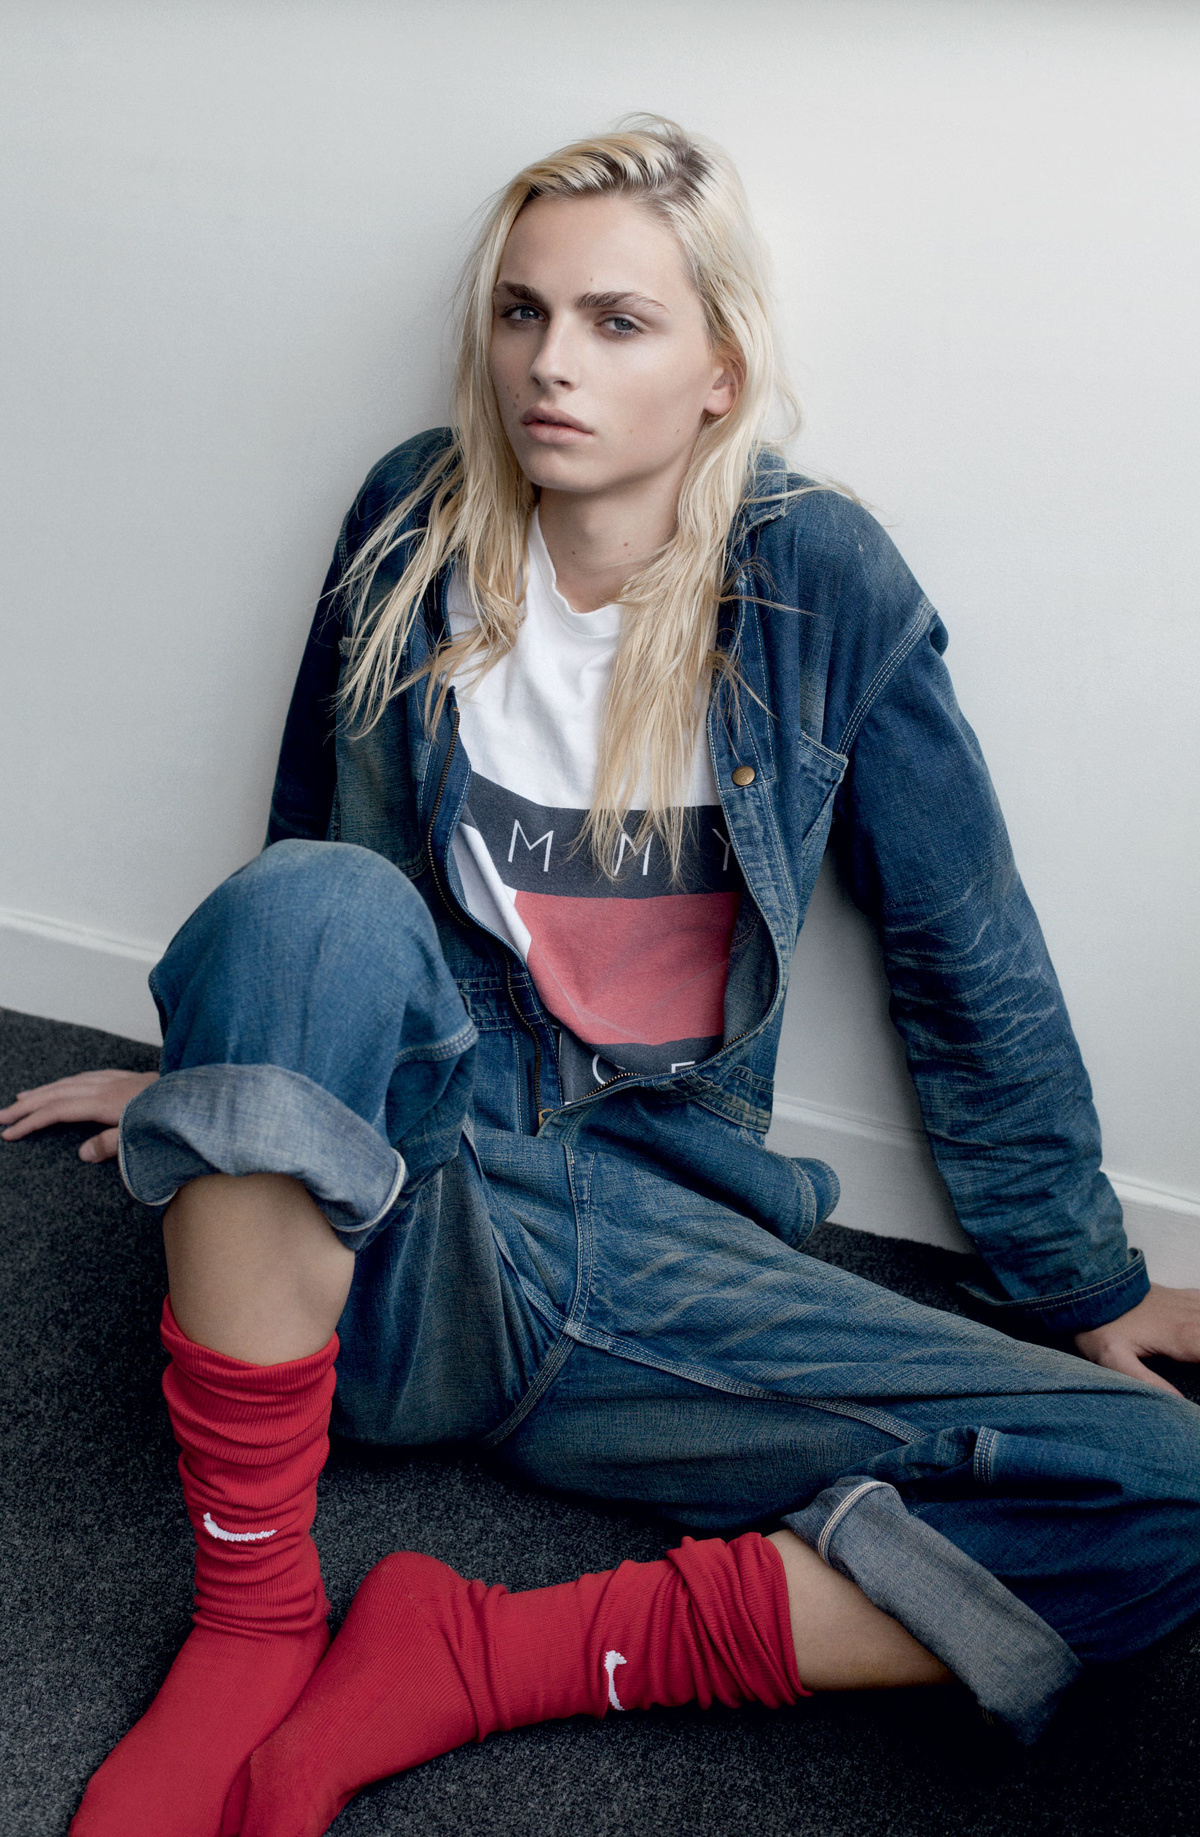 Andreja Pejic Is The Blonde Haired Blue Eyed Model Ripping Up Fashion